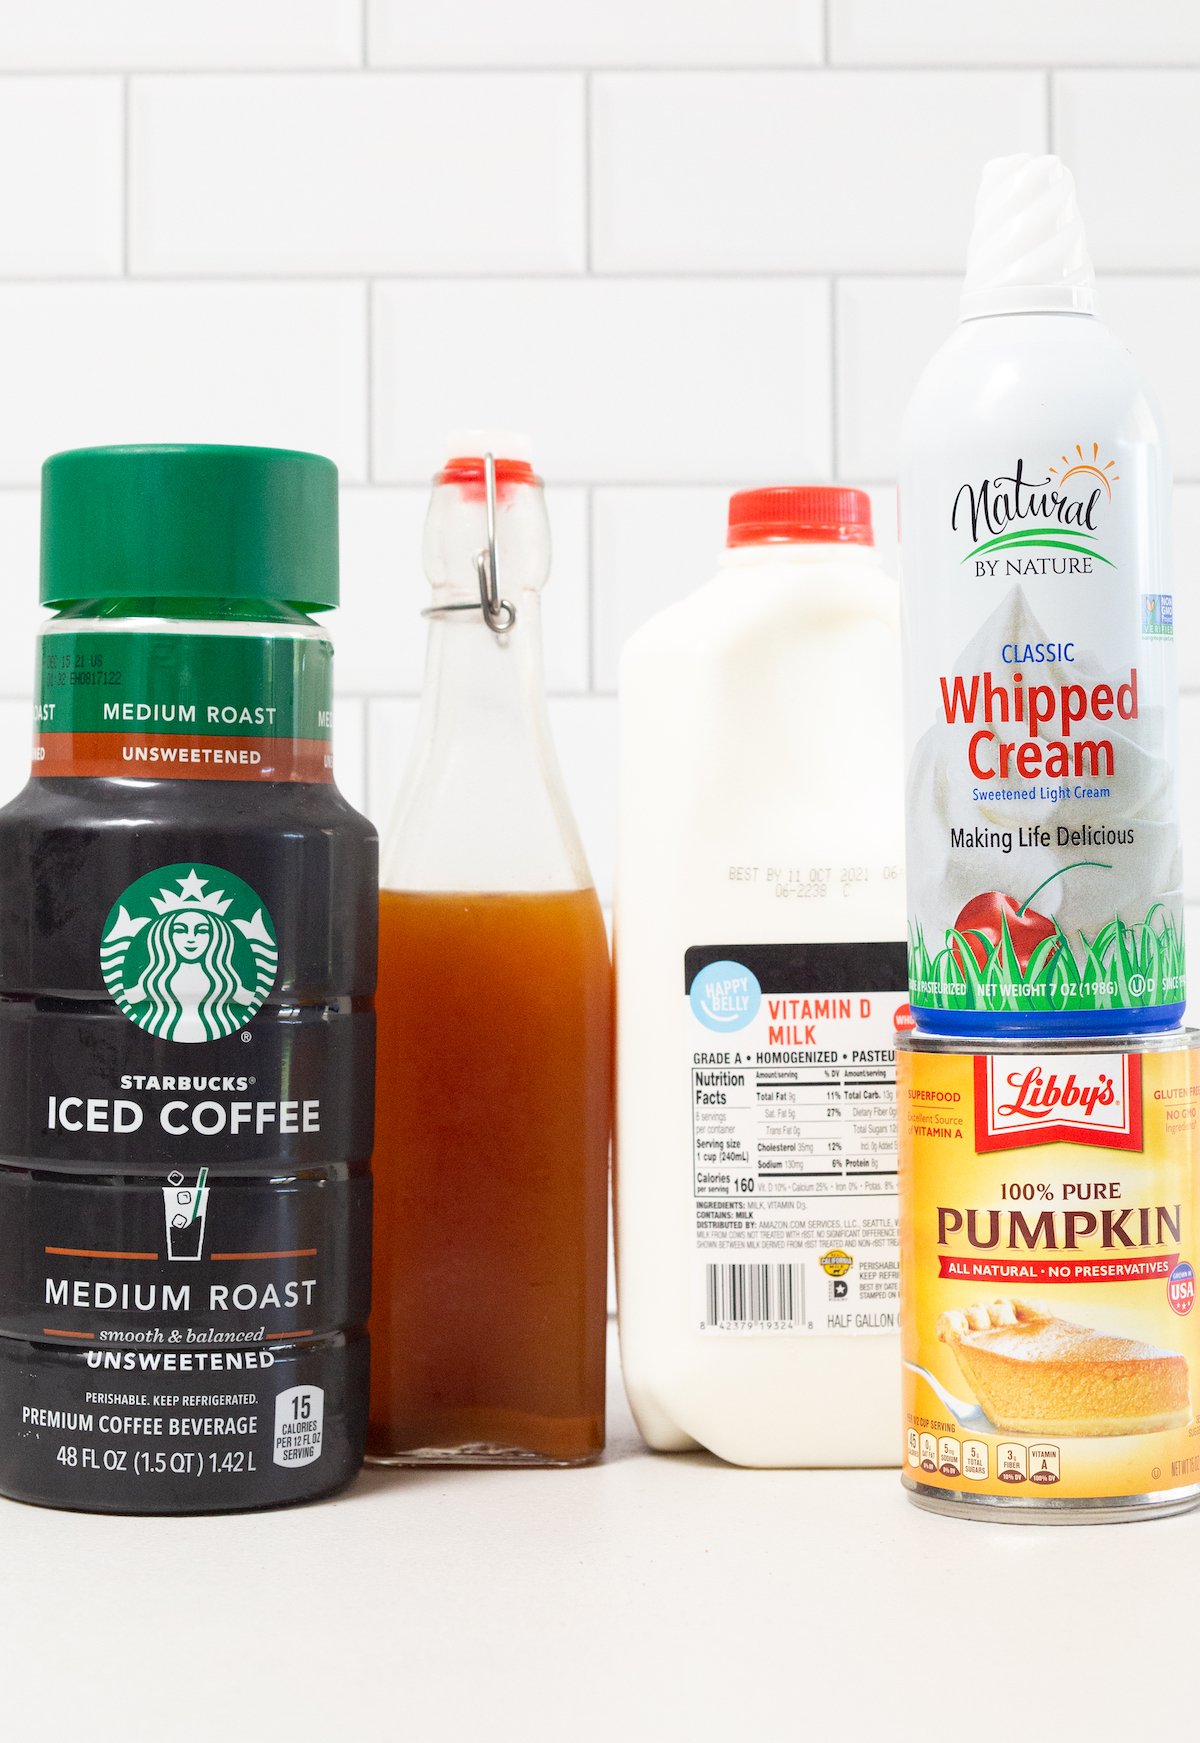 The ingredients to make a pumpkin spice frappuccino sit on a white background - iced coffee, pumpkin spice syrup, whole milk, canned pumpkin, and whipped cream